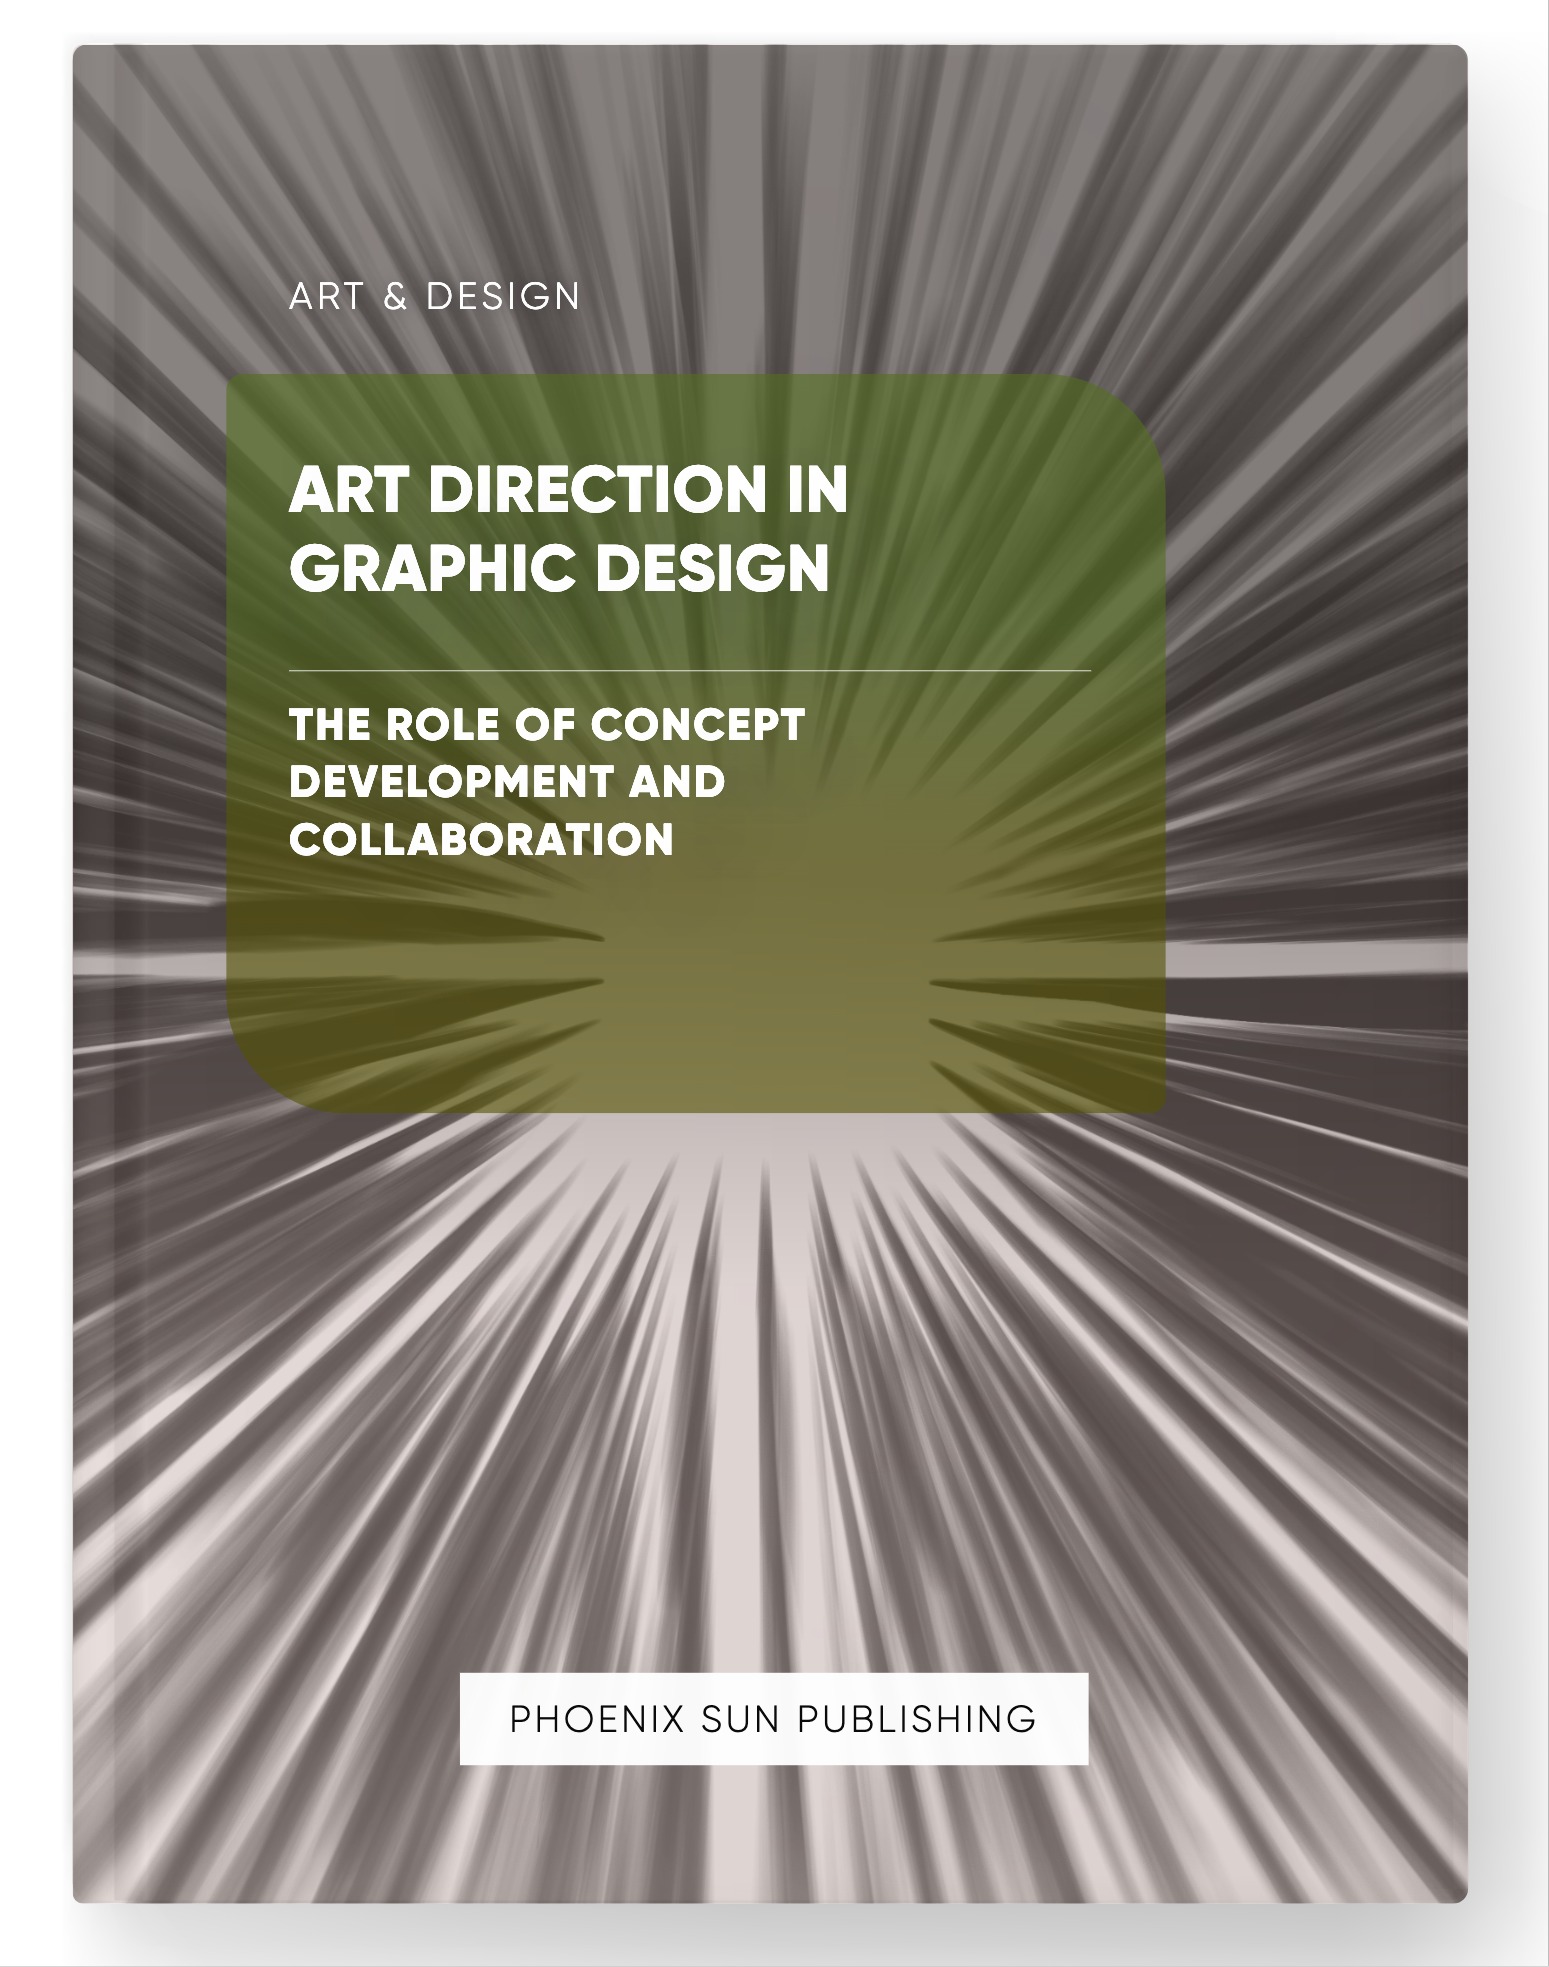 Art Direction in Graphic Design – The Role of Concept Development and Collaboration